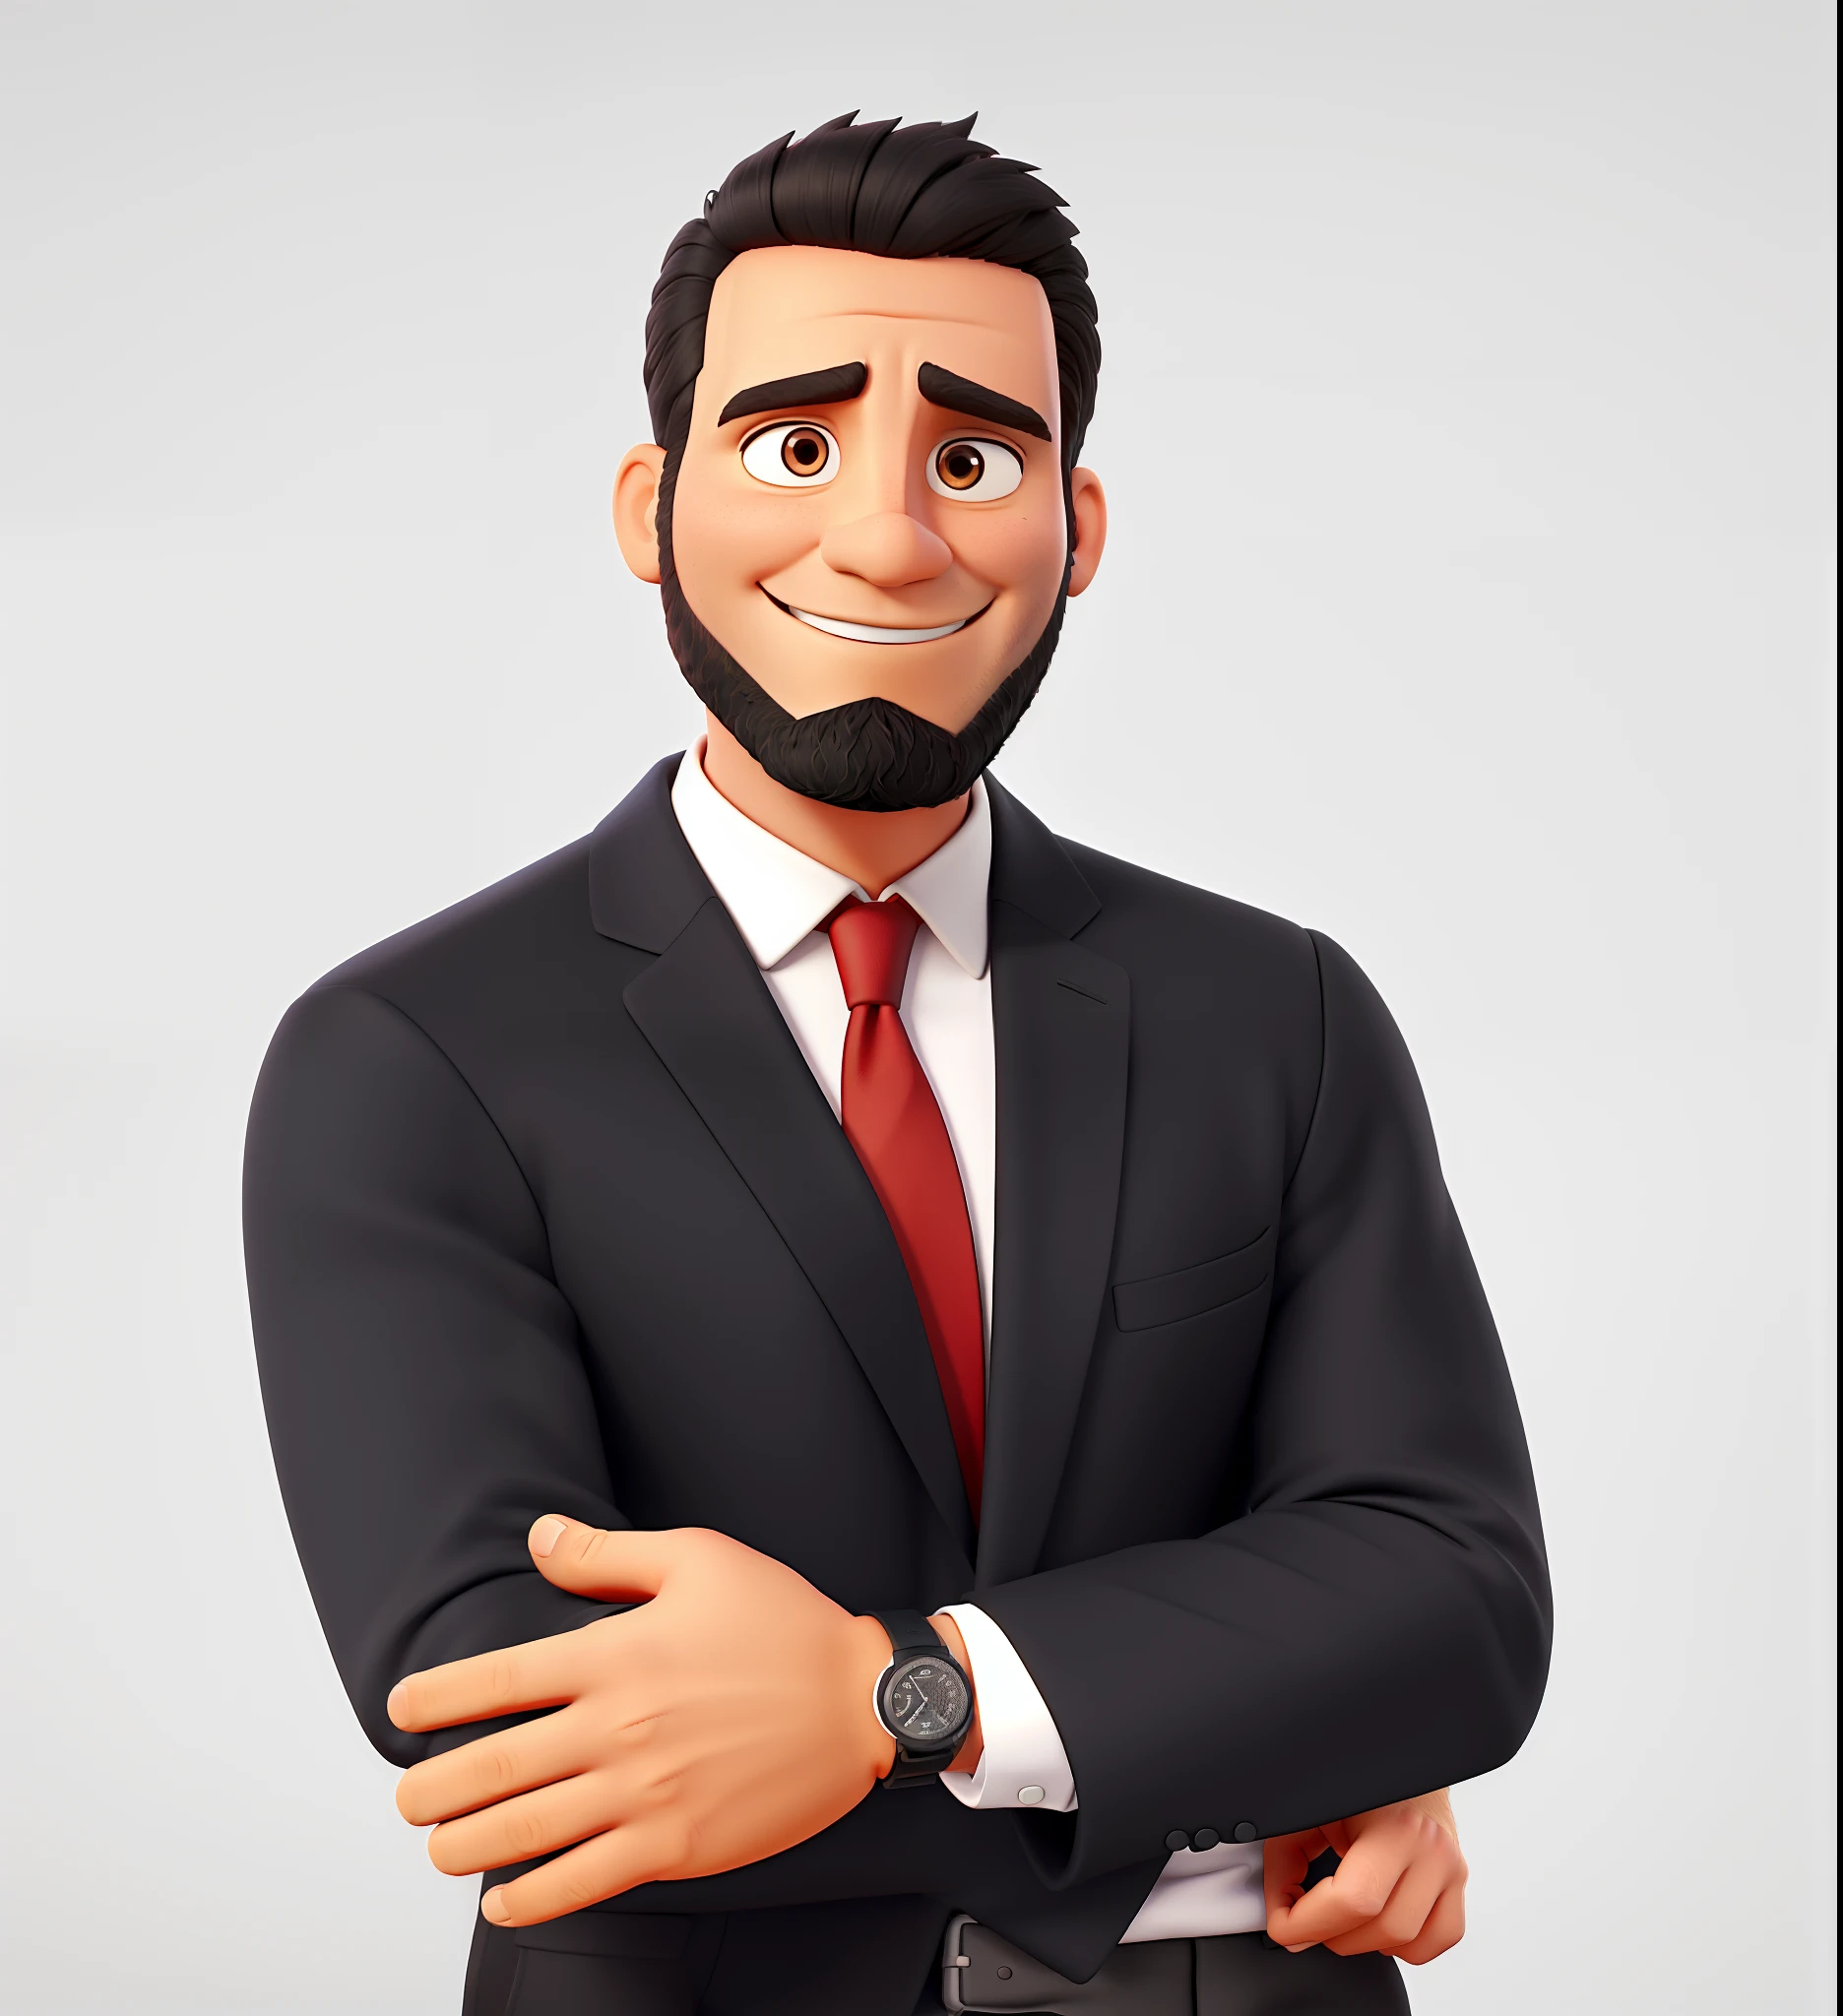 You can improve the thinner black beard, Haz que los zapatos Redley blancos parezcan de cuerpo completo. Man Standing Black Background On Speaker Type Stage With Microphone In One Hand And Book In The Other In Best Quality Disney Pixar Style, Mayor calidad.